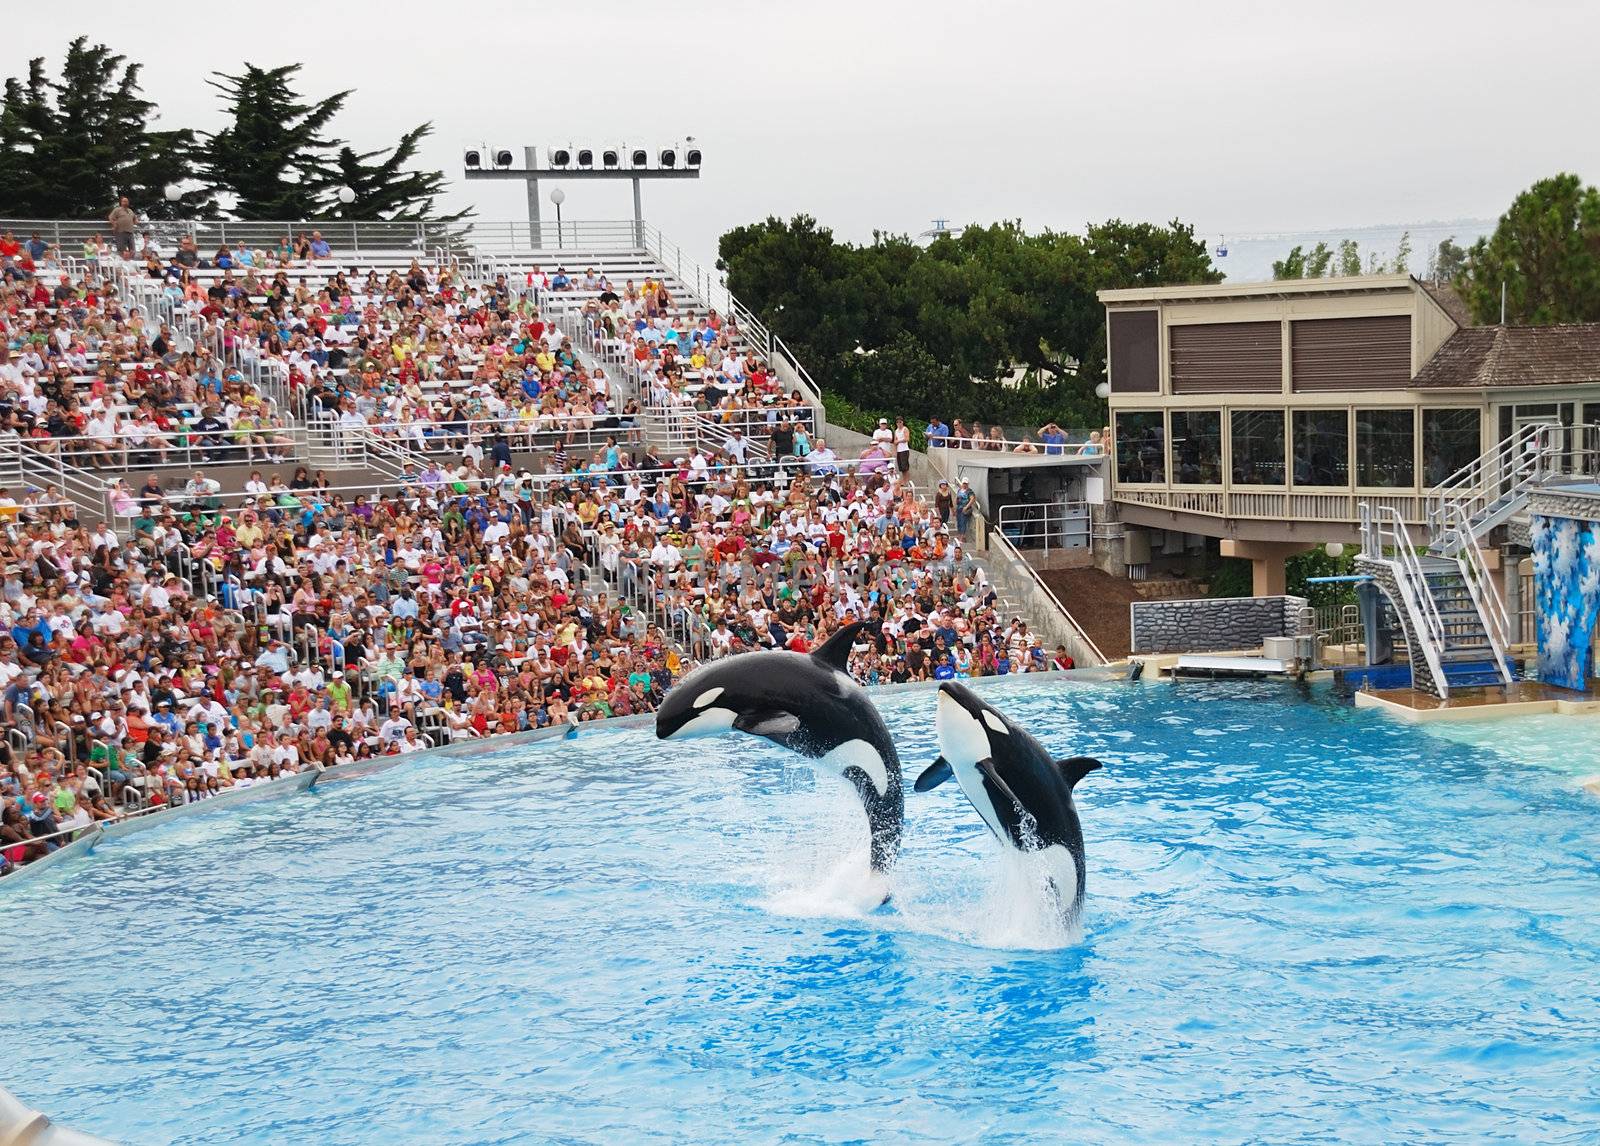 SEAWORLD, SAN DIEGO, CALIFORNIA, JULY 28, 2009, USA, whole year attraction with famous killer whale Shamu.